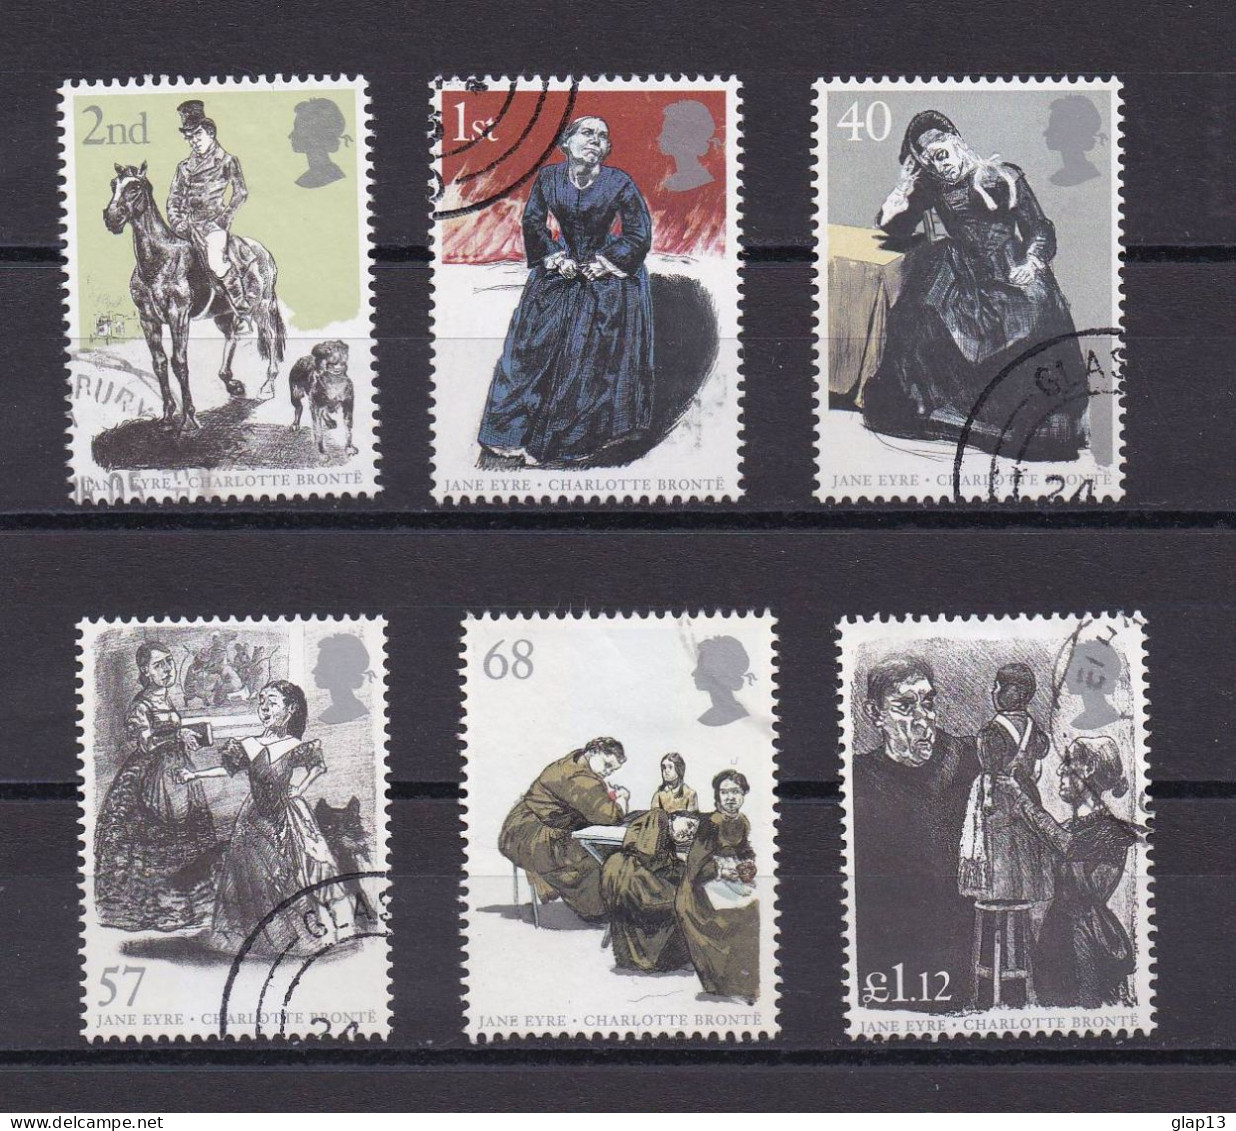 GRANDE-BRETAGNE 2005 TIMBRE N°2622/27 OBITERE JANE EYRE - Used Stamps